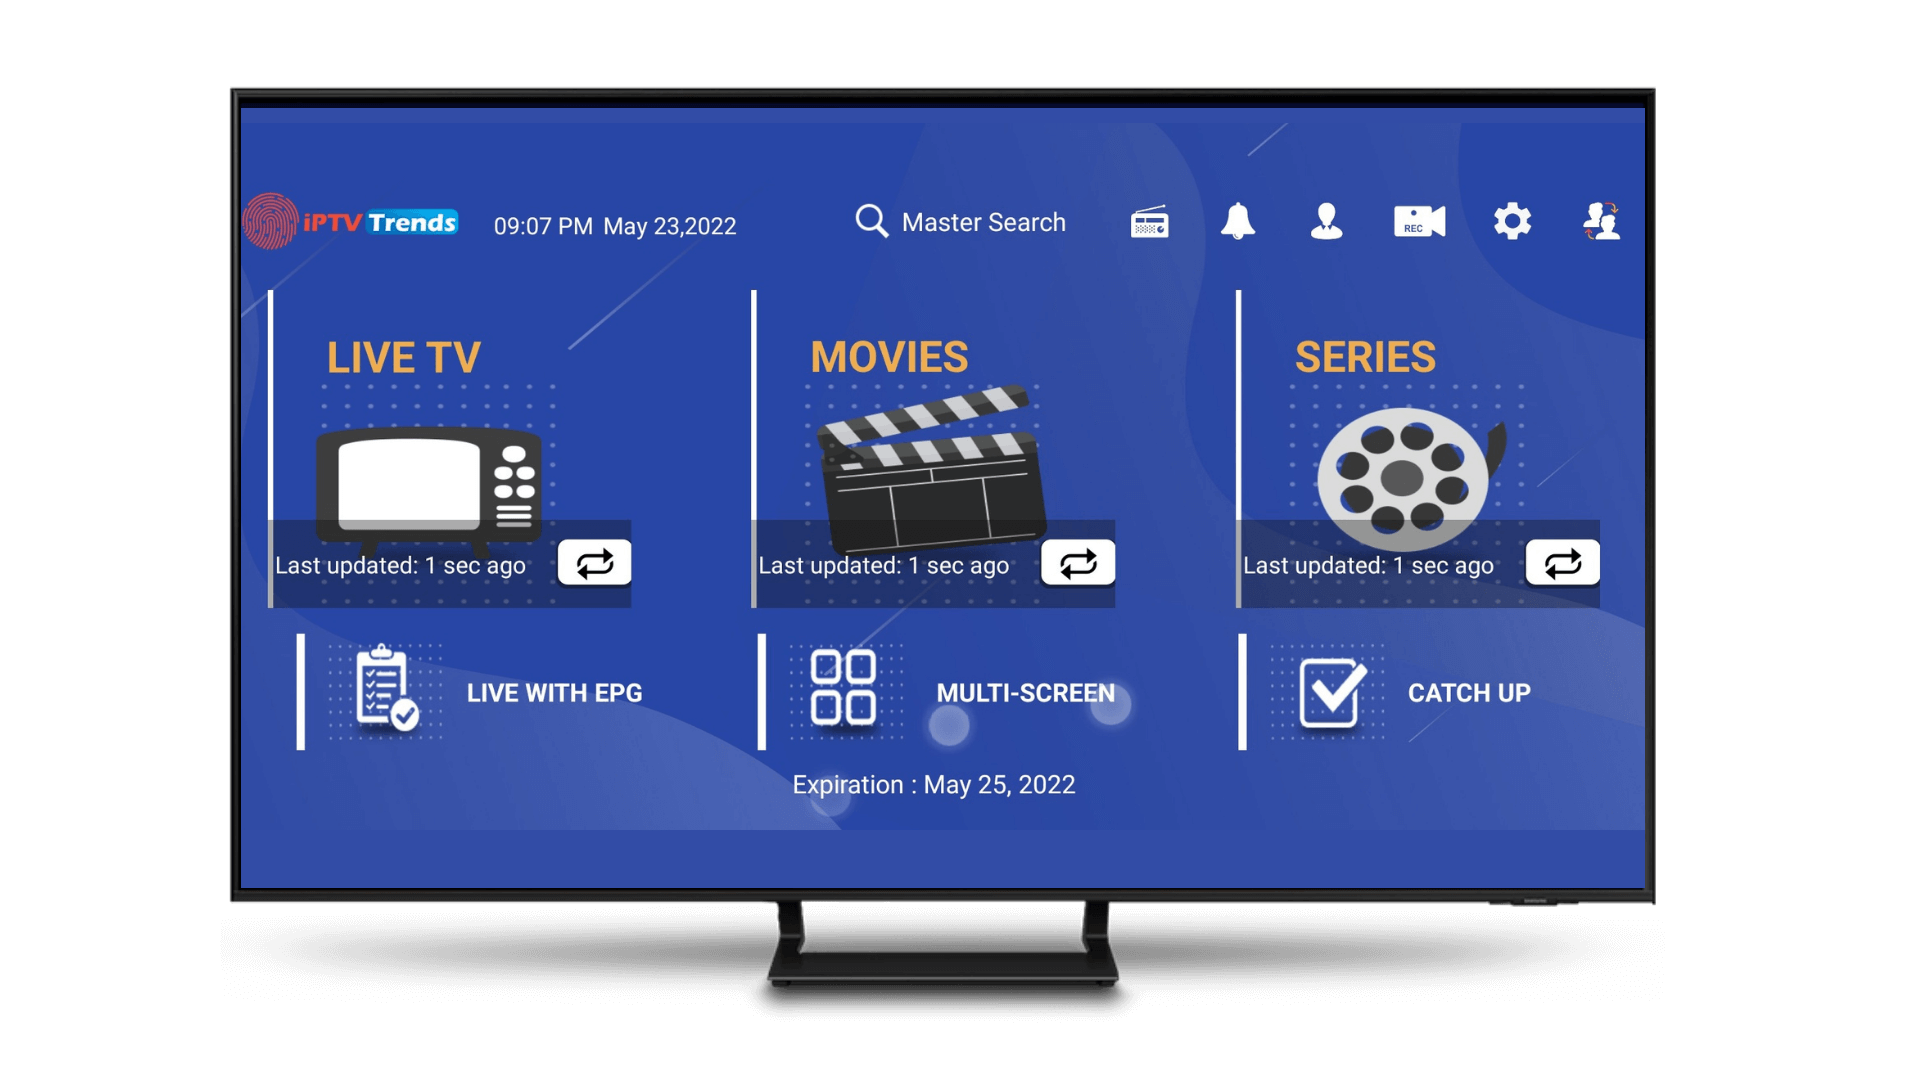 How to Install IPTV Trends